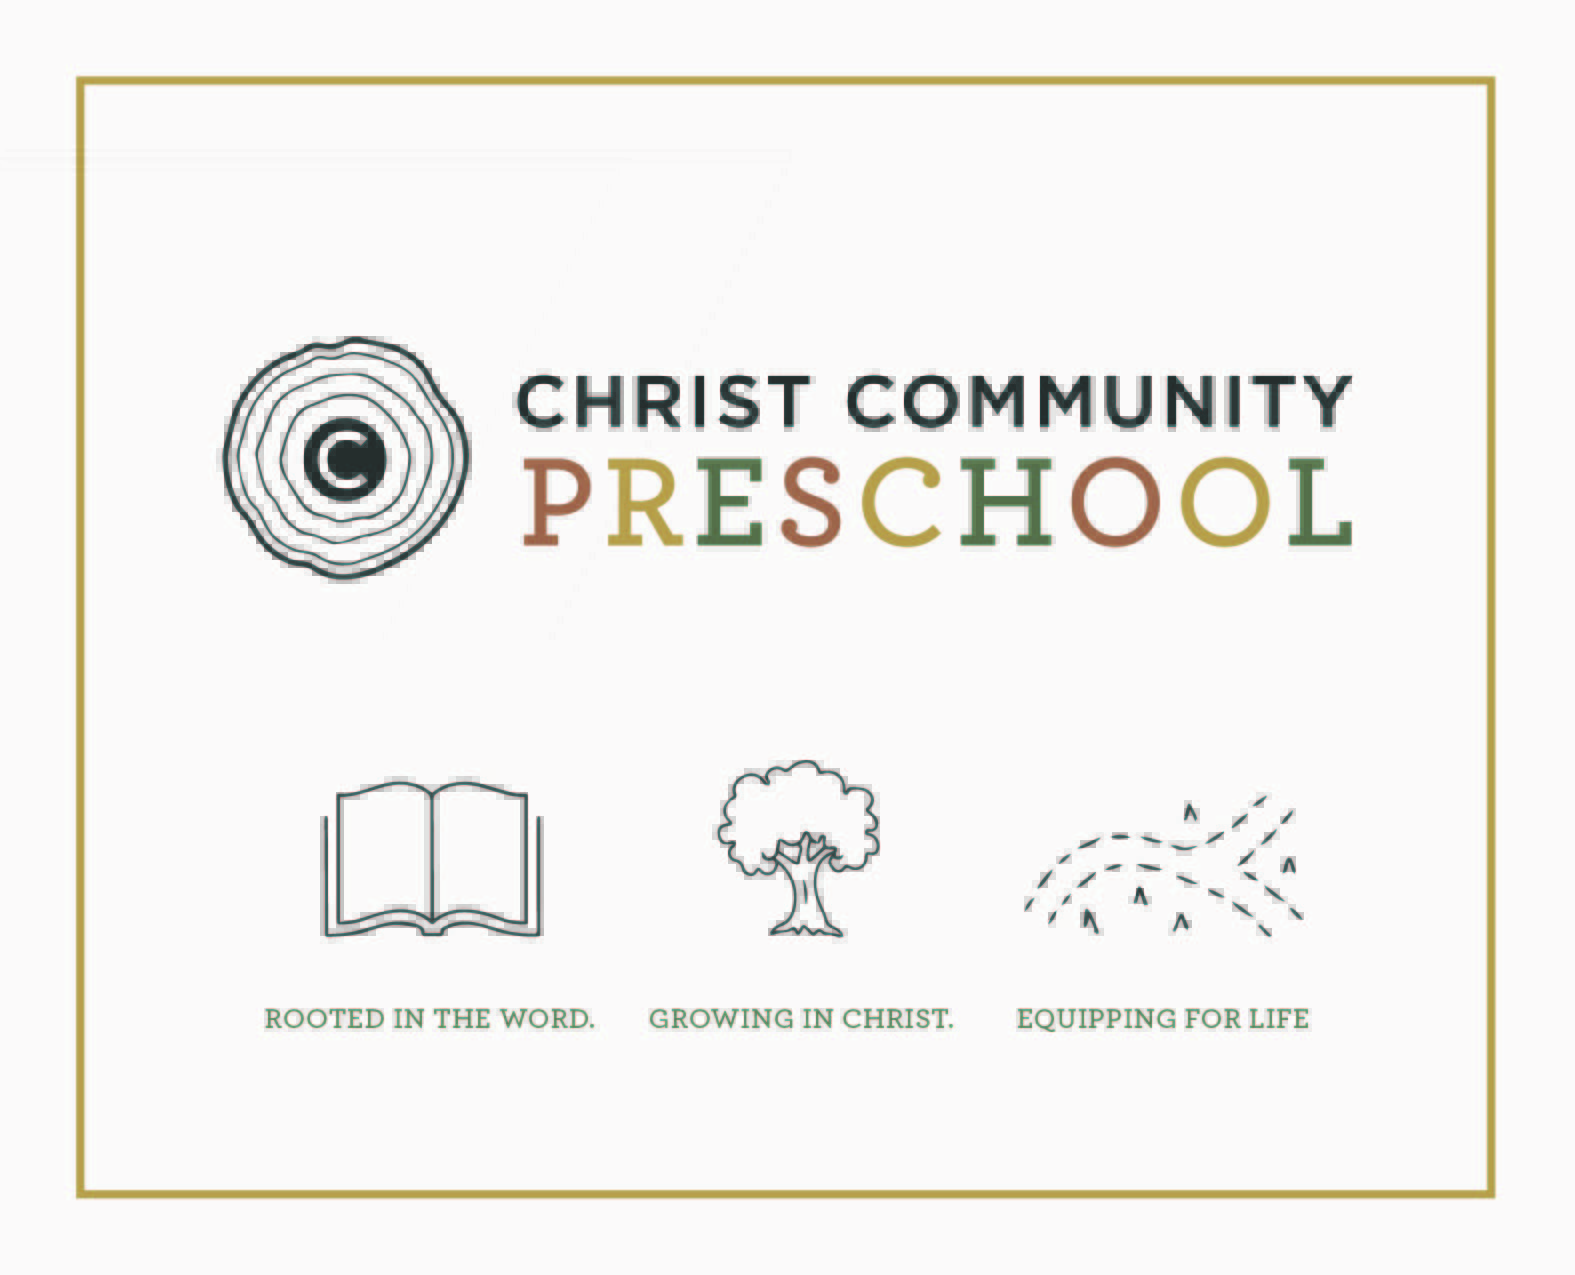 Preschool logo: rooted in the Word, growing in Christ, equipping for life